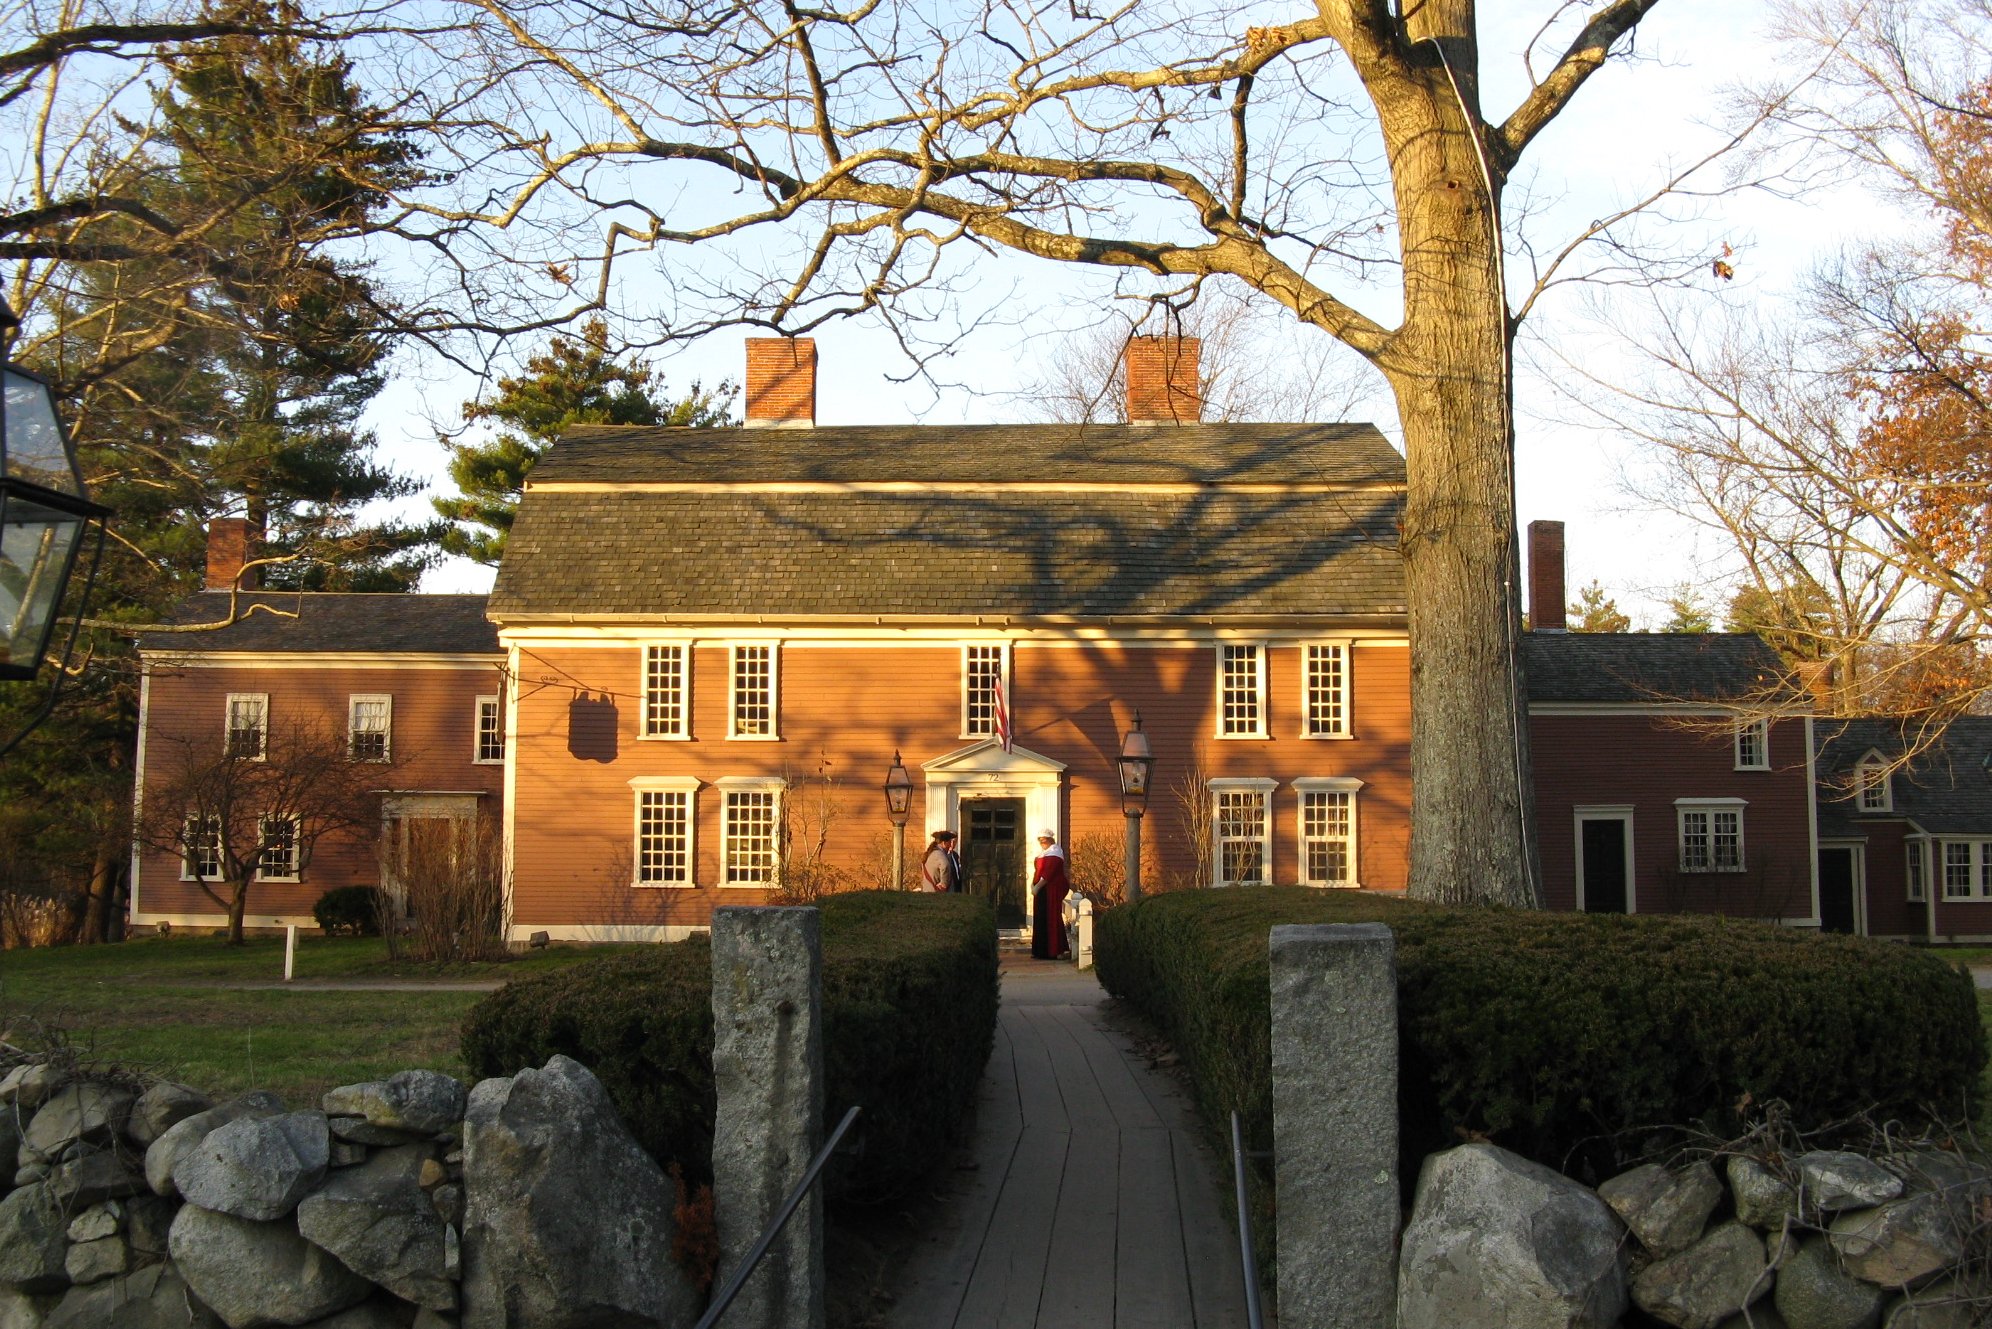 Longfellow’s Wayside Inn. A large brick building with a tree in front